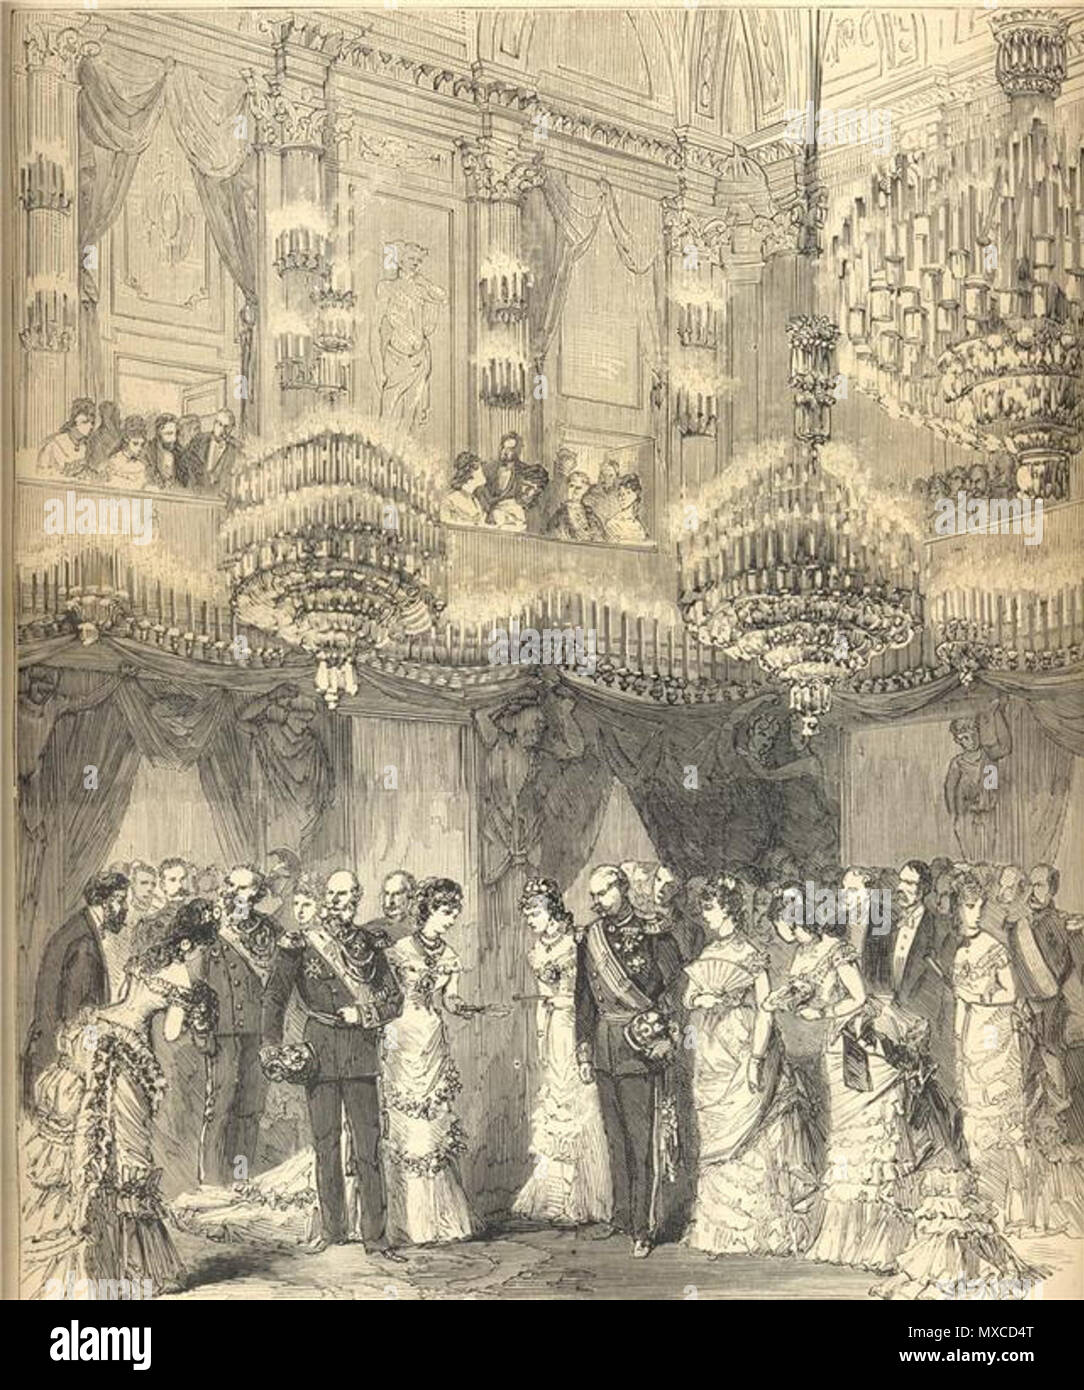 .  English: 'The Official Reception in the Royal Palace in Milan, Italy, of Wilhelm I of Germany, in 1875' (notably, in the 'Sala delle Cariatidi', later demolished by a bombing during World War 2). From 'L'Illustration' ( http://www.lillustration.com ), 1875. Drawing by Charles Fichot (1817-1903) & Paul-Adolphe Kauffmann (1849-1935?), engraving by Joseph Burn-Smeeton (floruit 1840-1880) and his pupil and later partner Auguste Tilly (18..-1898).  . 1875. Charles Fichot; Paul-Adolphe Kauffmann; Joseph Burn-Smeeton; Auguste Tilly. 415 MI - 1875 - Da L'illustration, 1875 - Visita Guglielmo II a M Stock Photo